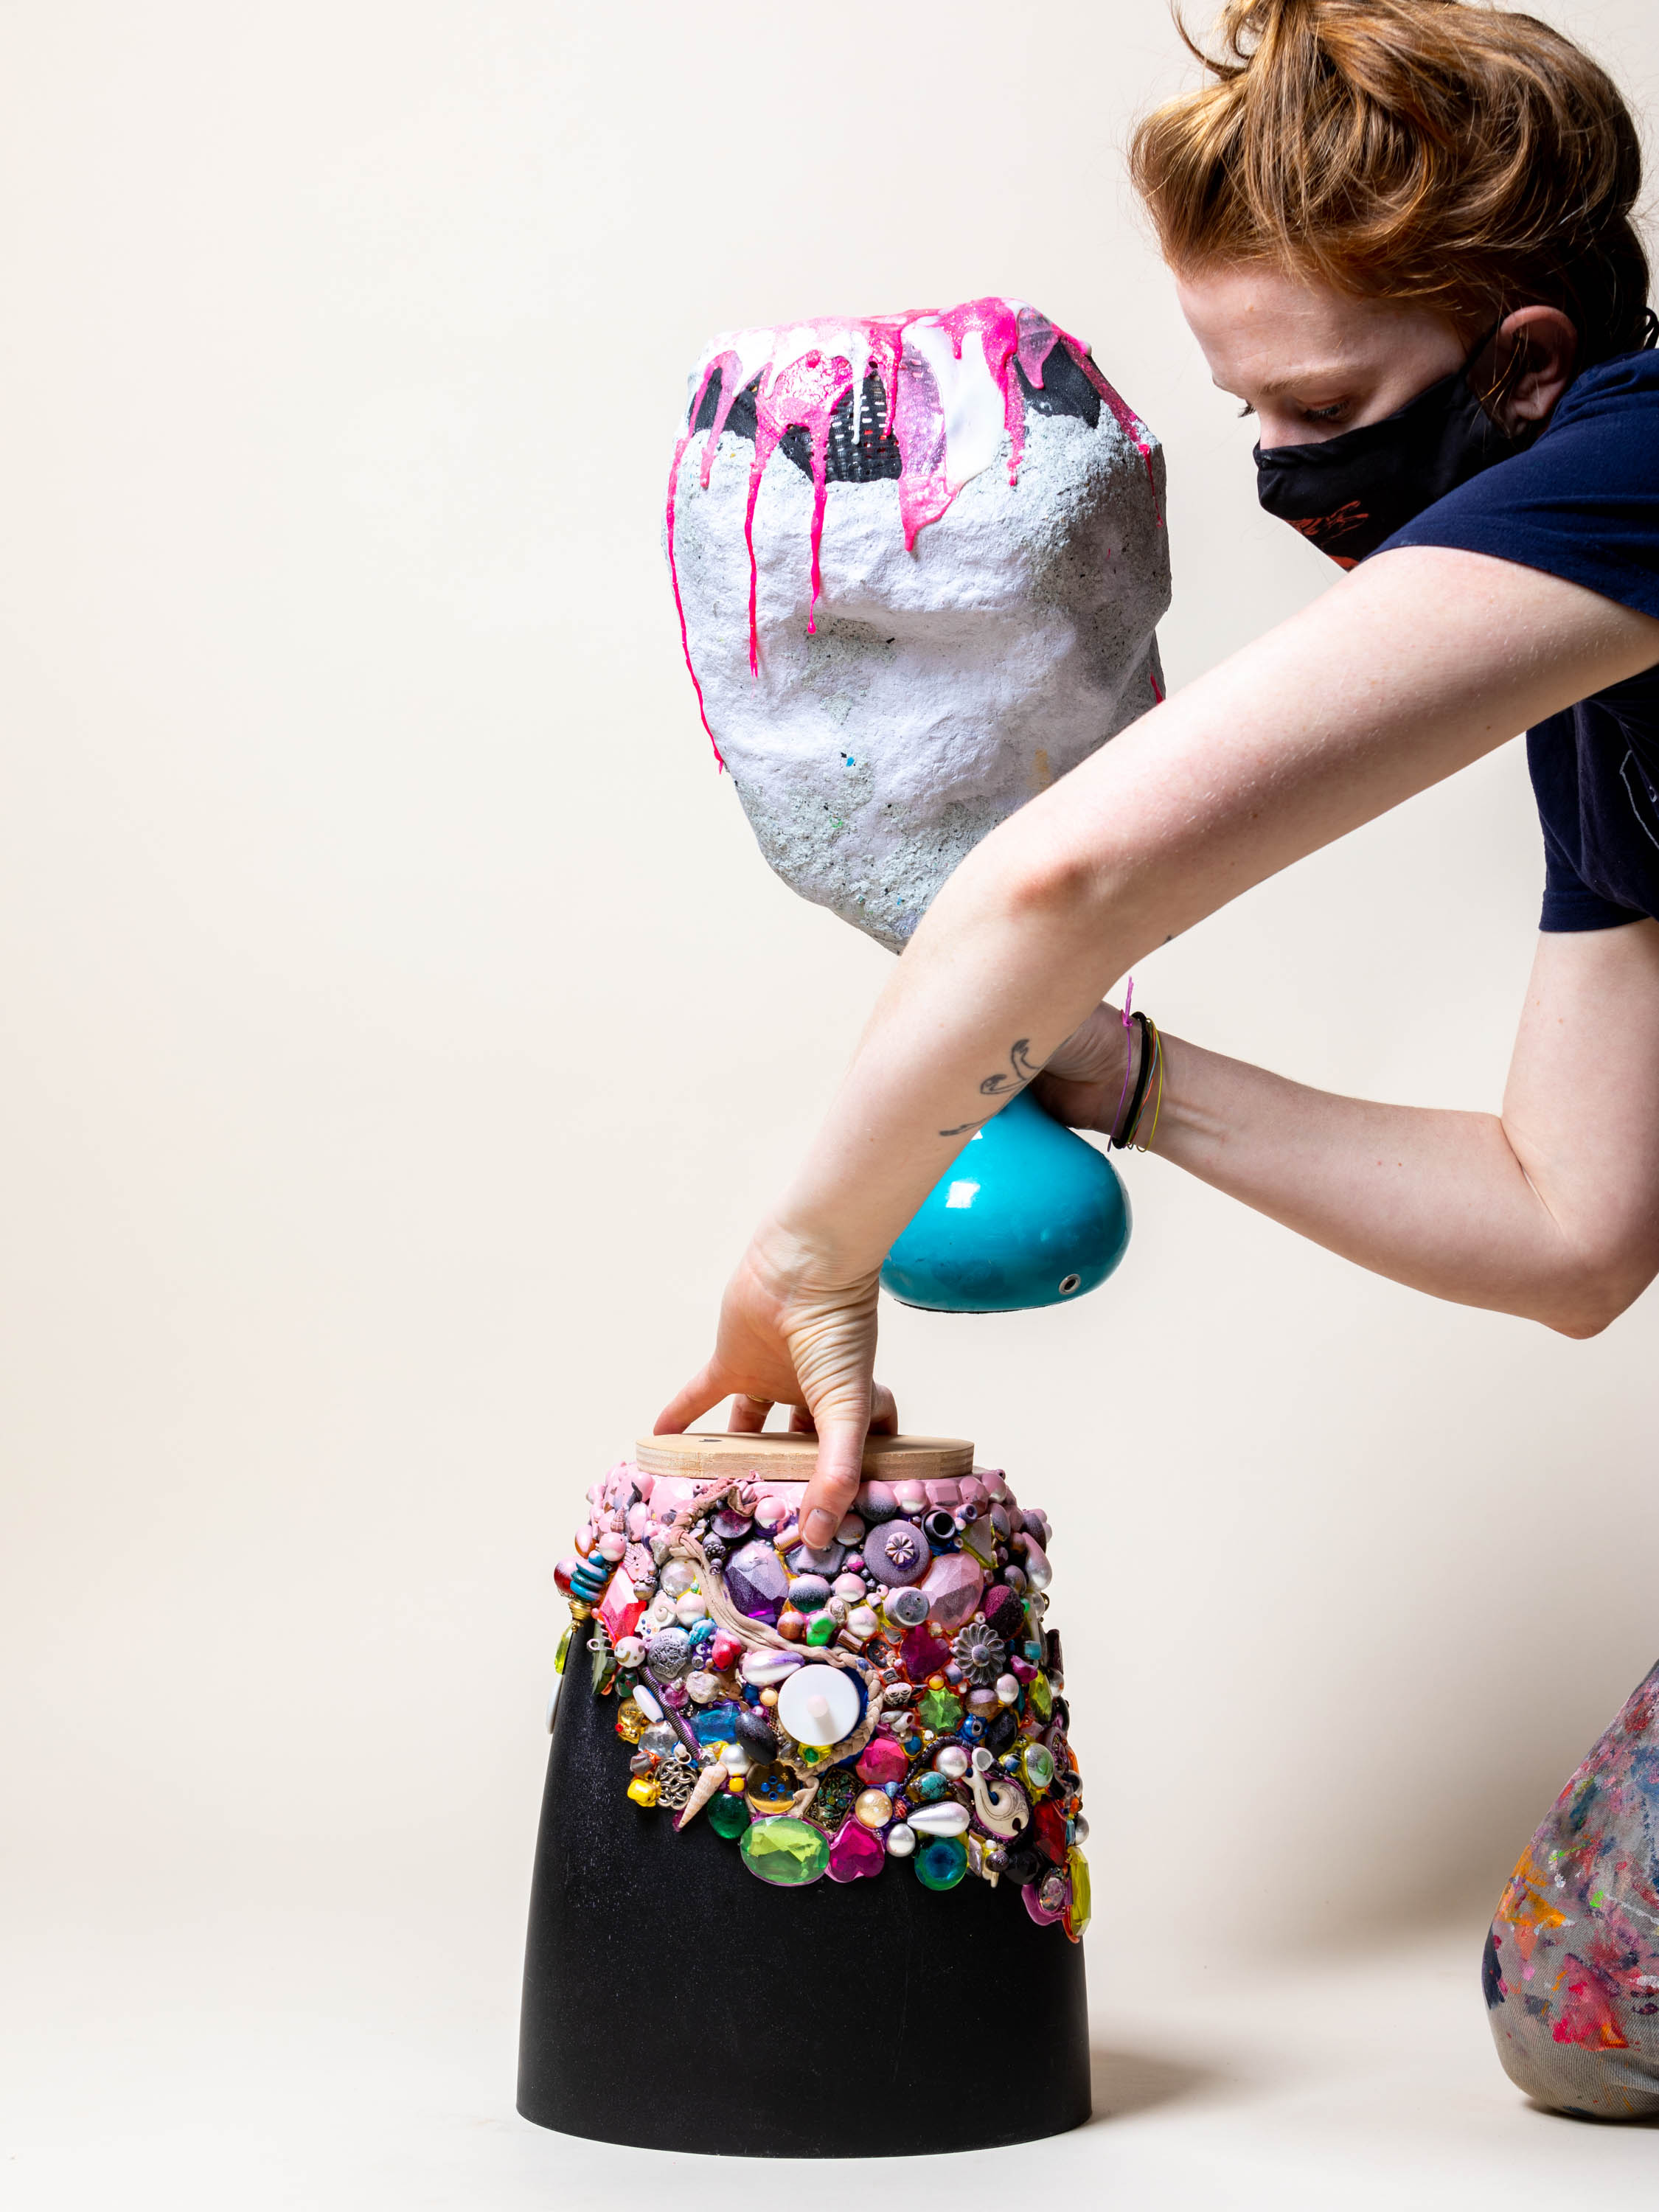 A woman with red hair in a bun and a light skin tone holds a colorful sculpture in her right hand and holds another one that sits on the floor. The object on the floor consists of a black pot covered in little objects such as shells, beads, and pearls.